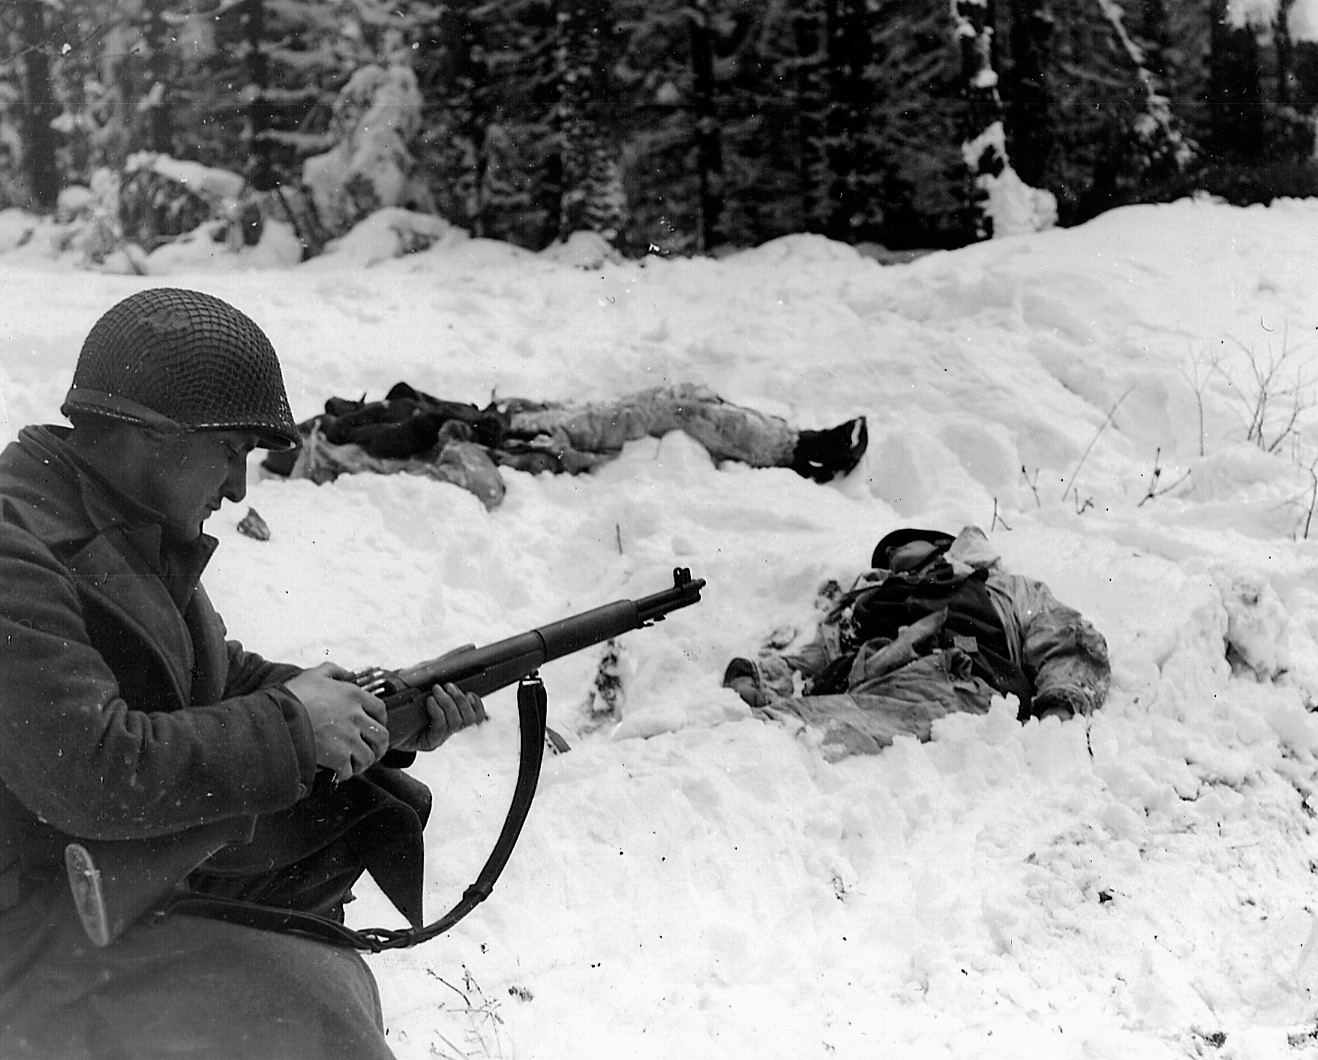 A soldier reloads his M-1 rifle near the bodies of two dead Germans in the bitter cold of January, 1945. 